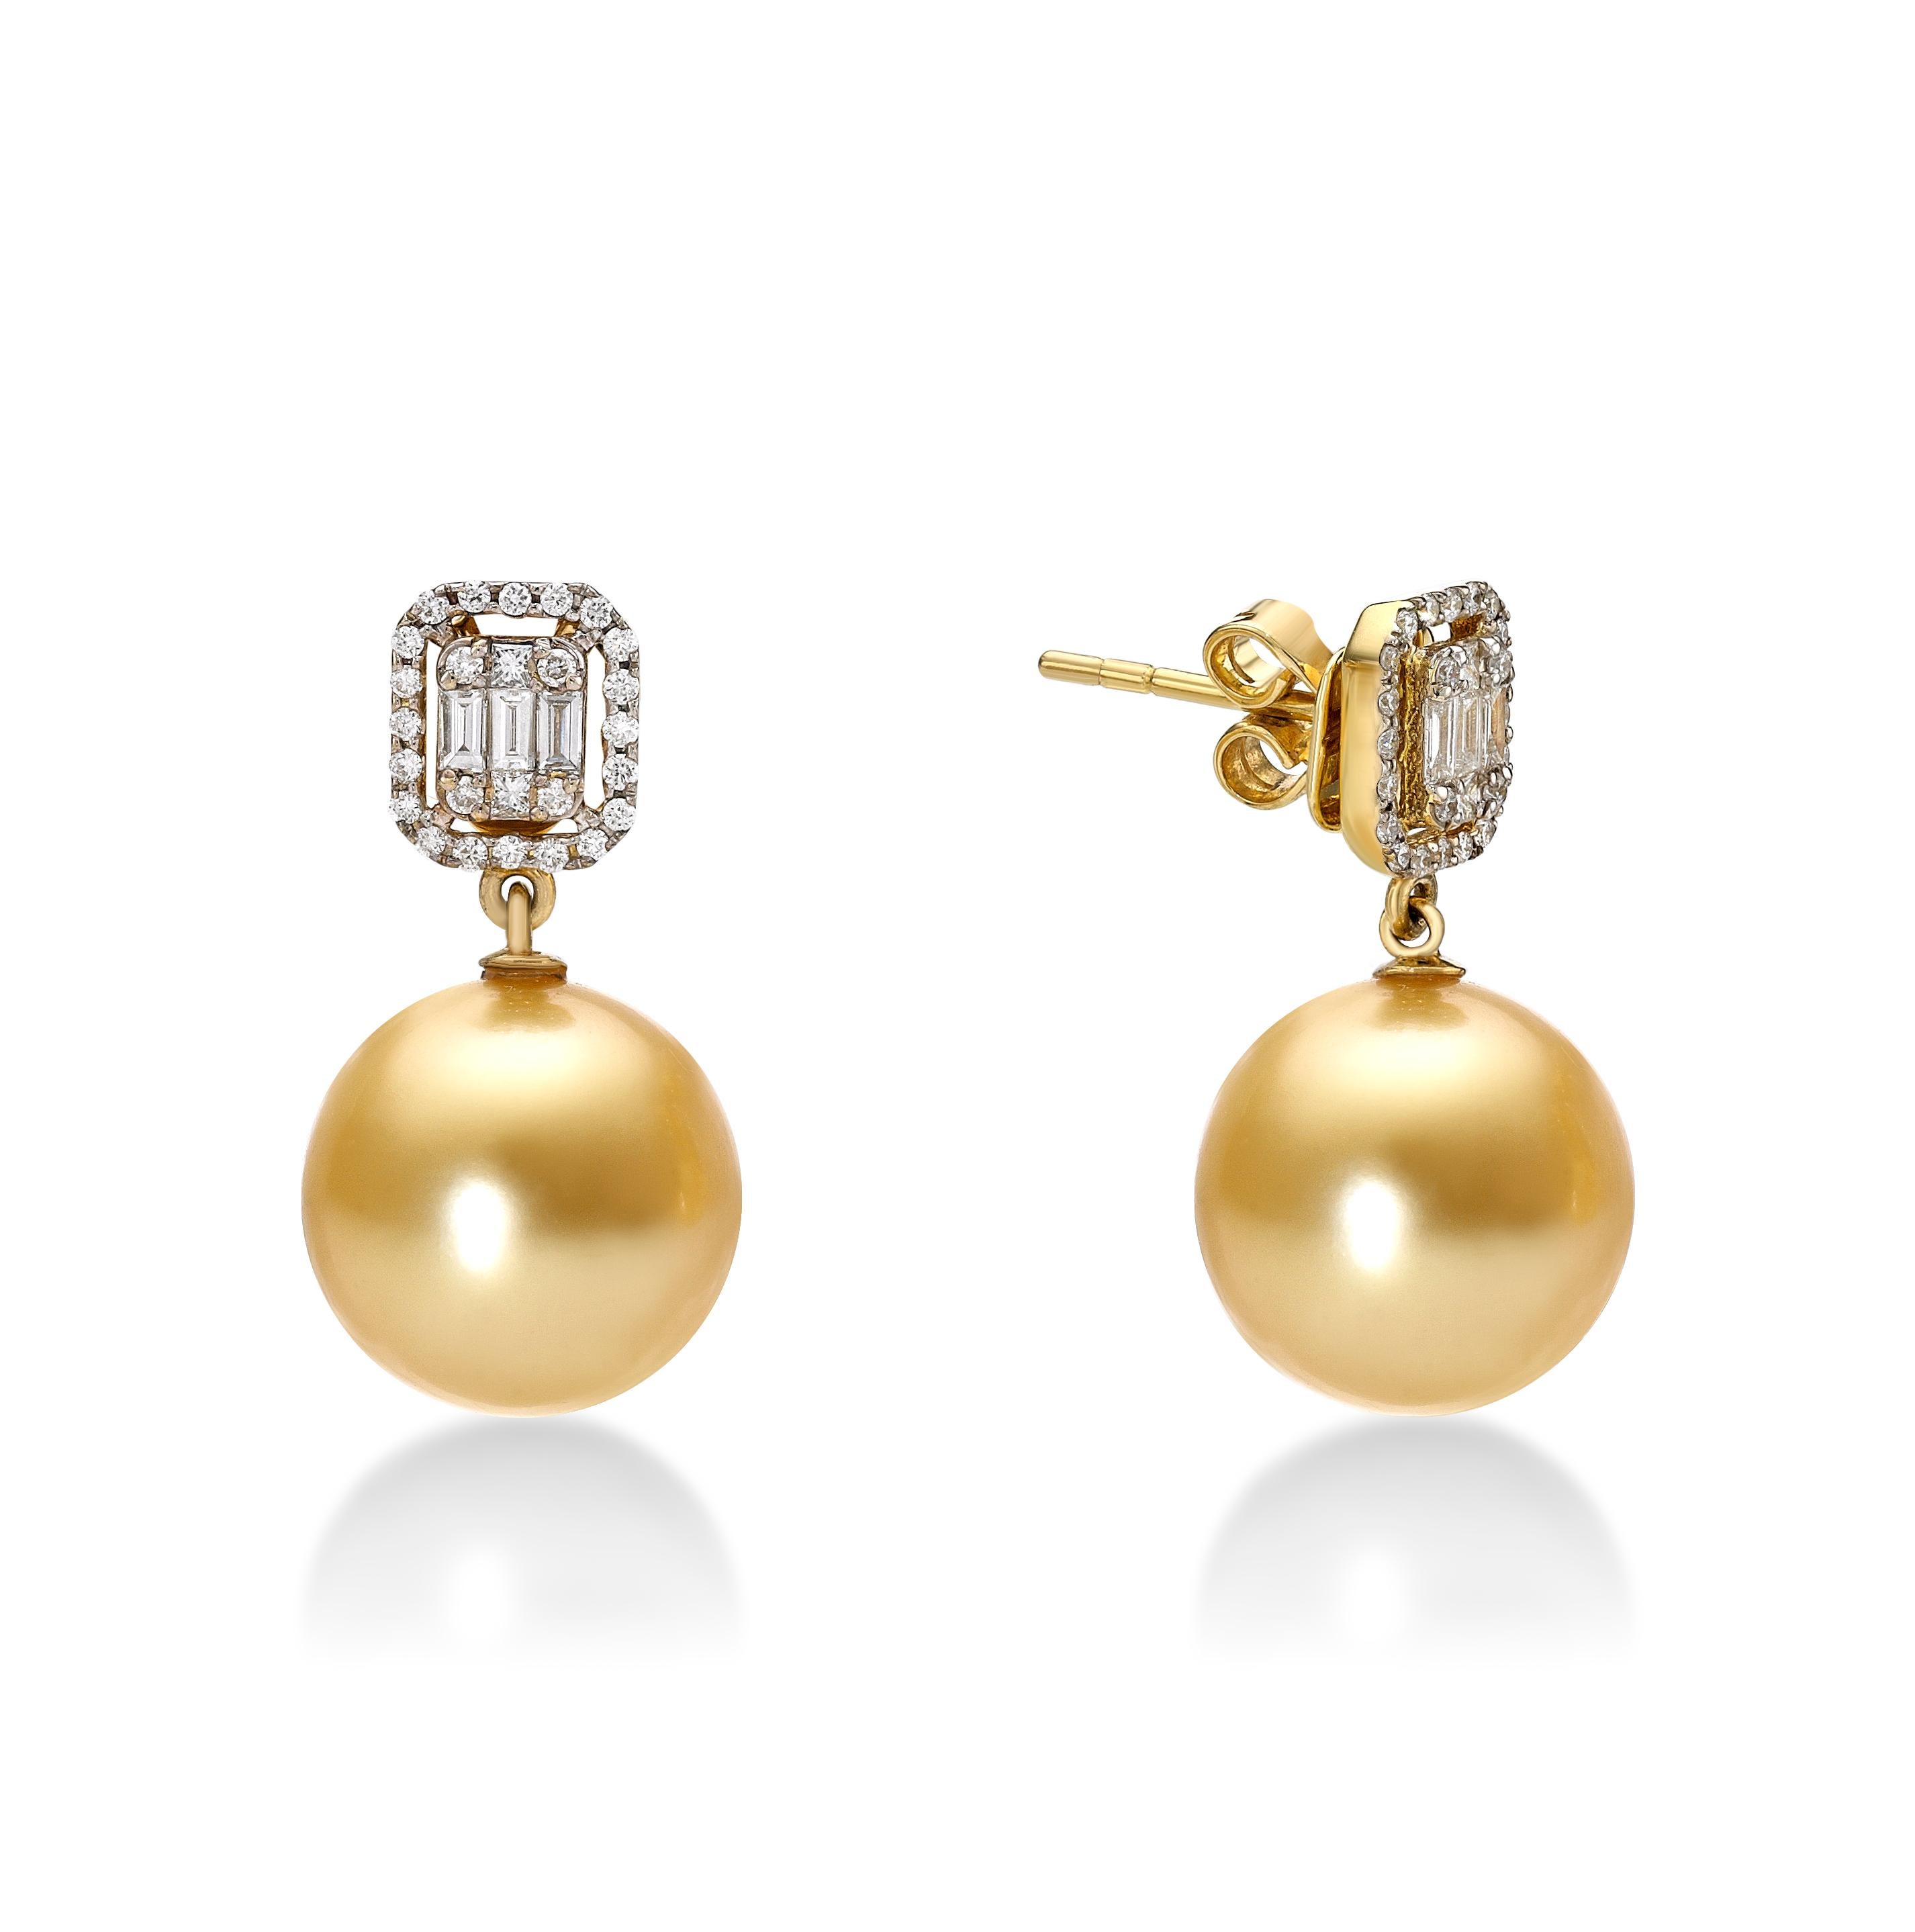 Pearls symbolize loyalty, integrity, generosity, and purity, elegant and unique.

The center south sea pearl is 11mm, diamond totally  0.32 carat, made in 18K yellow gold.
